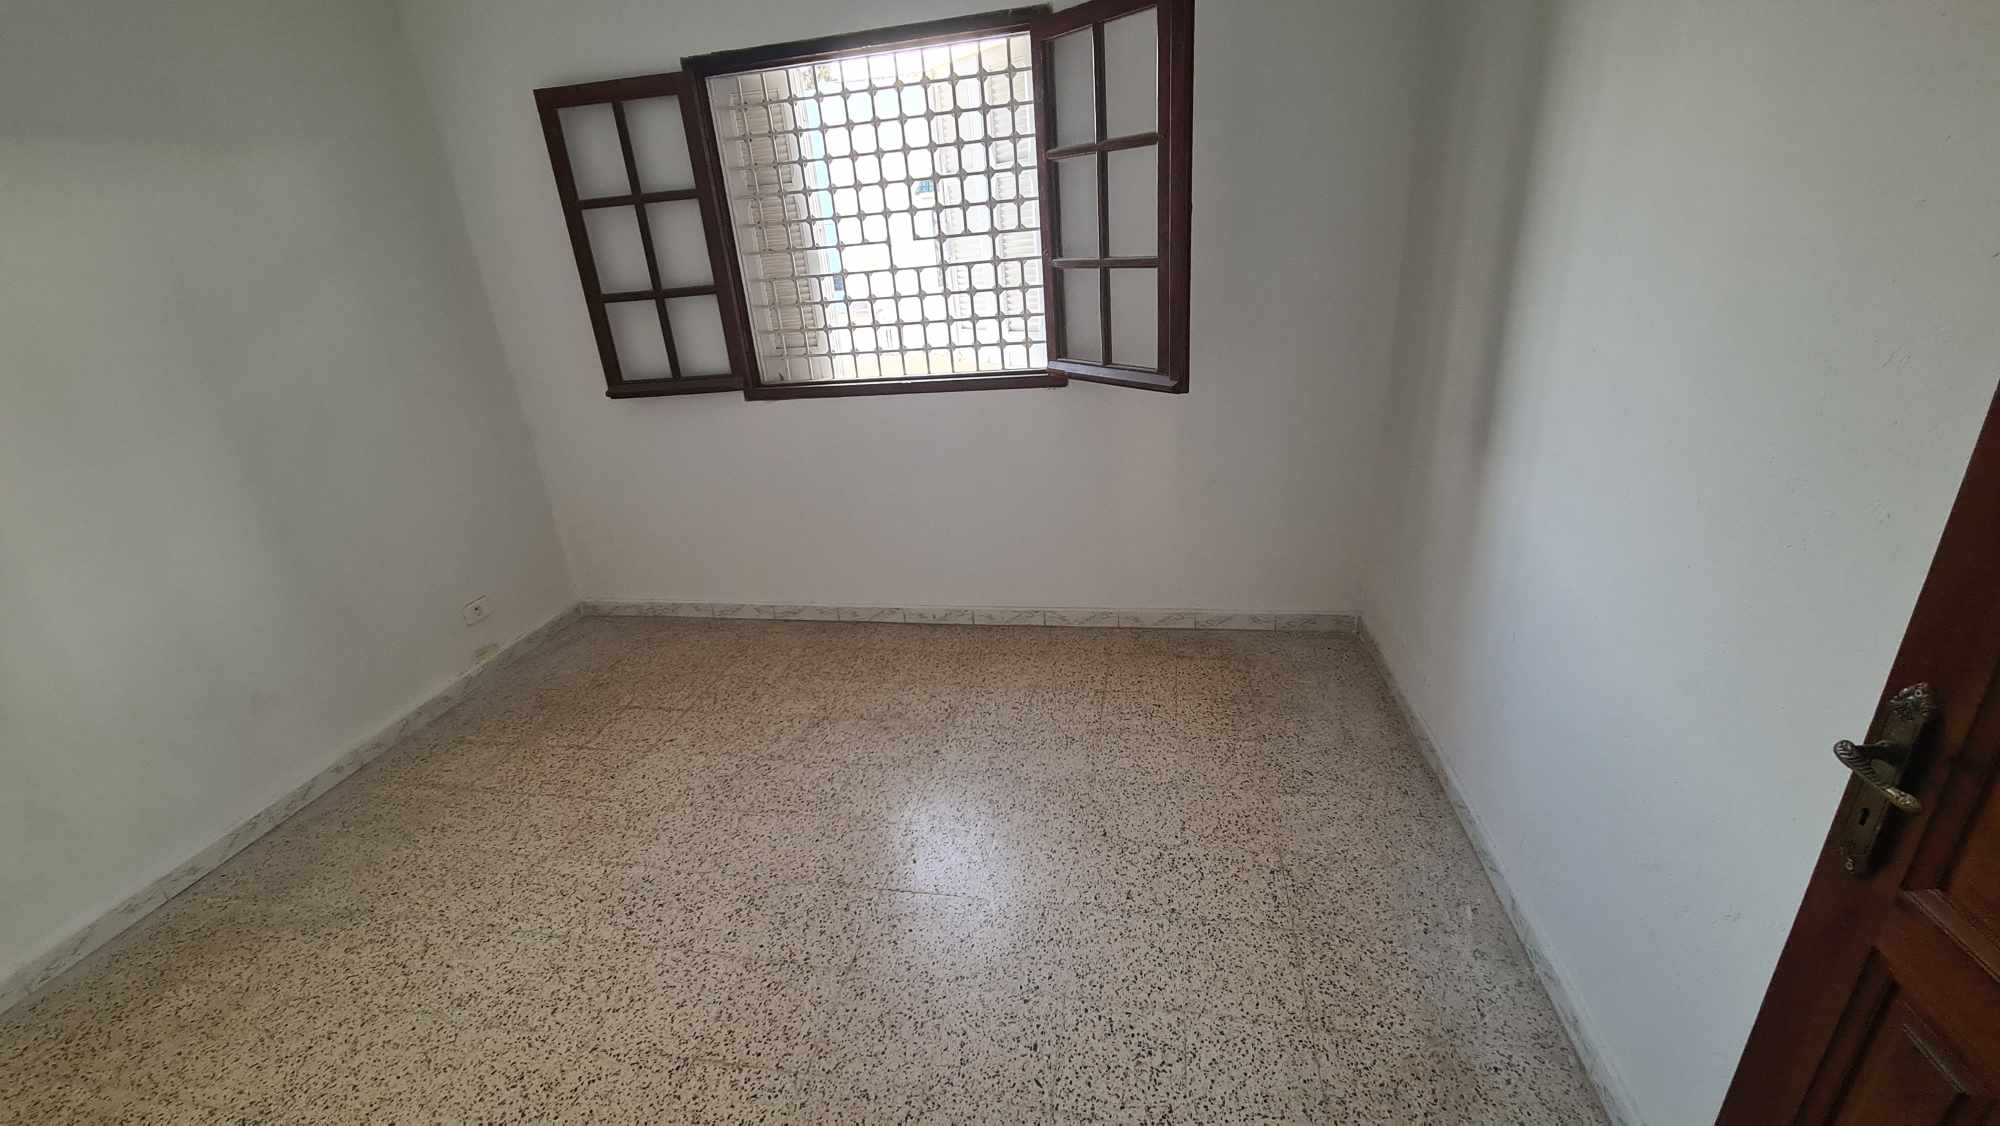 Nabeul Nabeul Location Appart. 3 pices 796eme appartement  nabeul